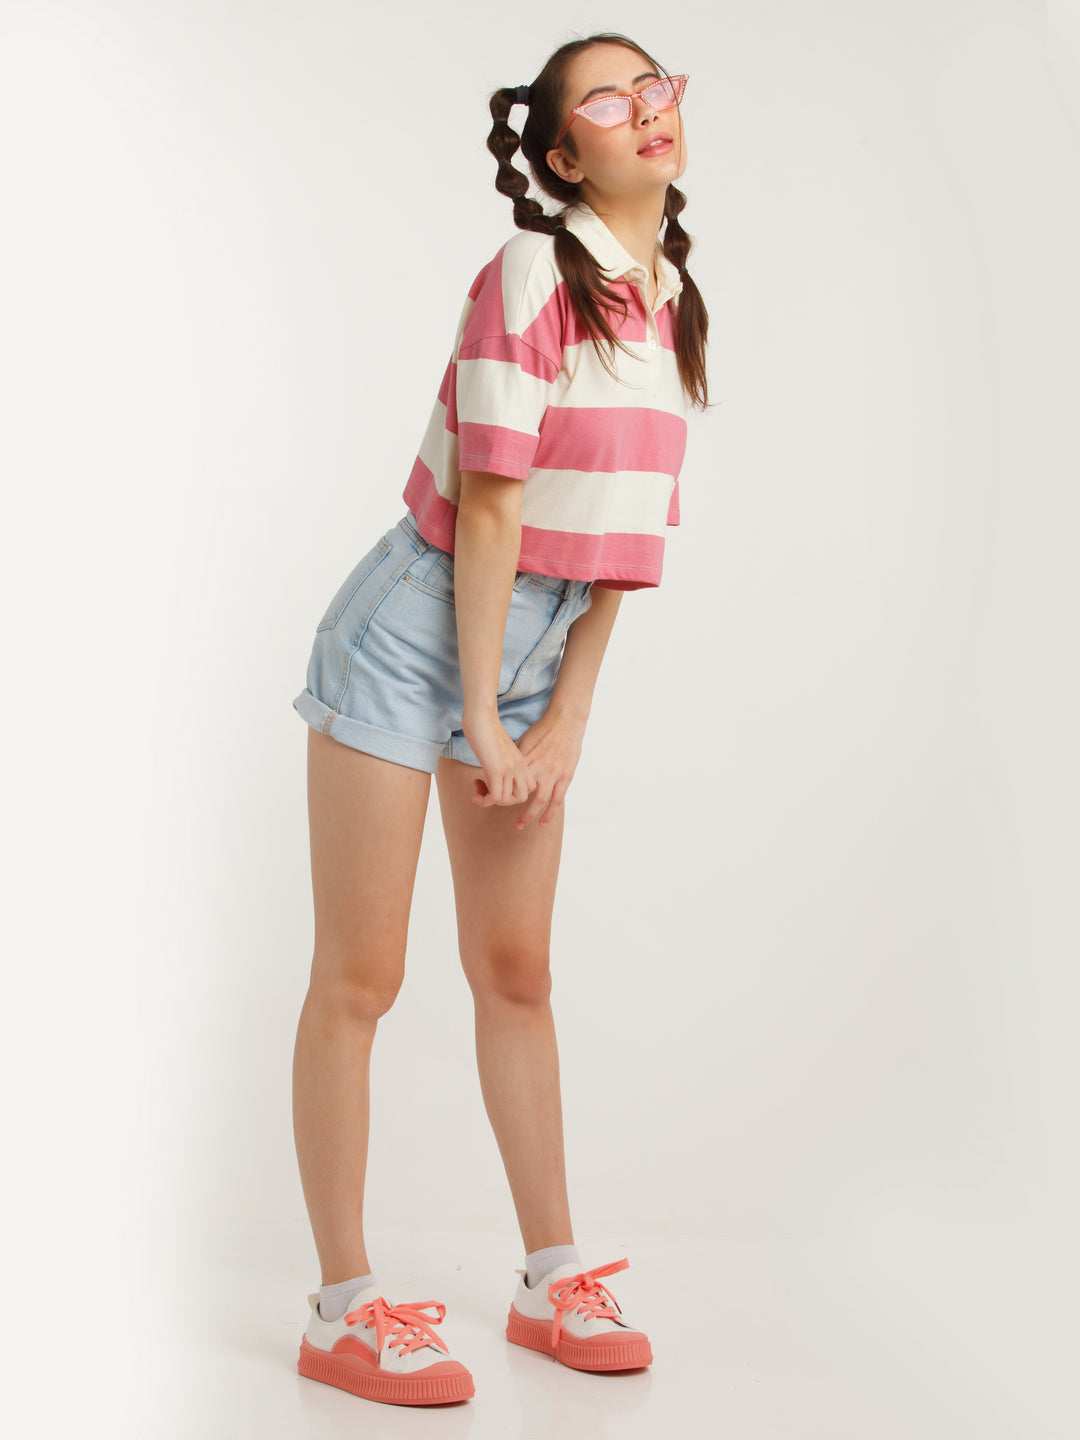 Off-White & Pink Striped Cropped T-Shirt For Women